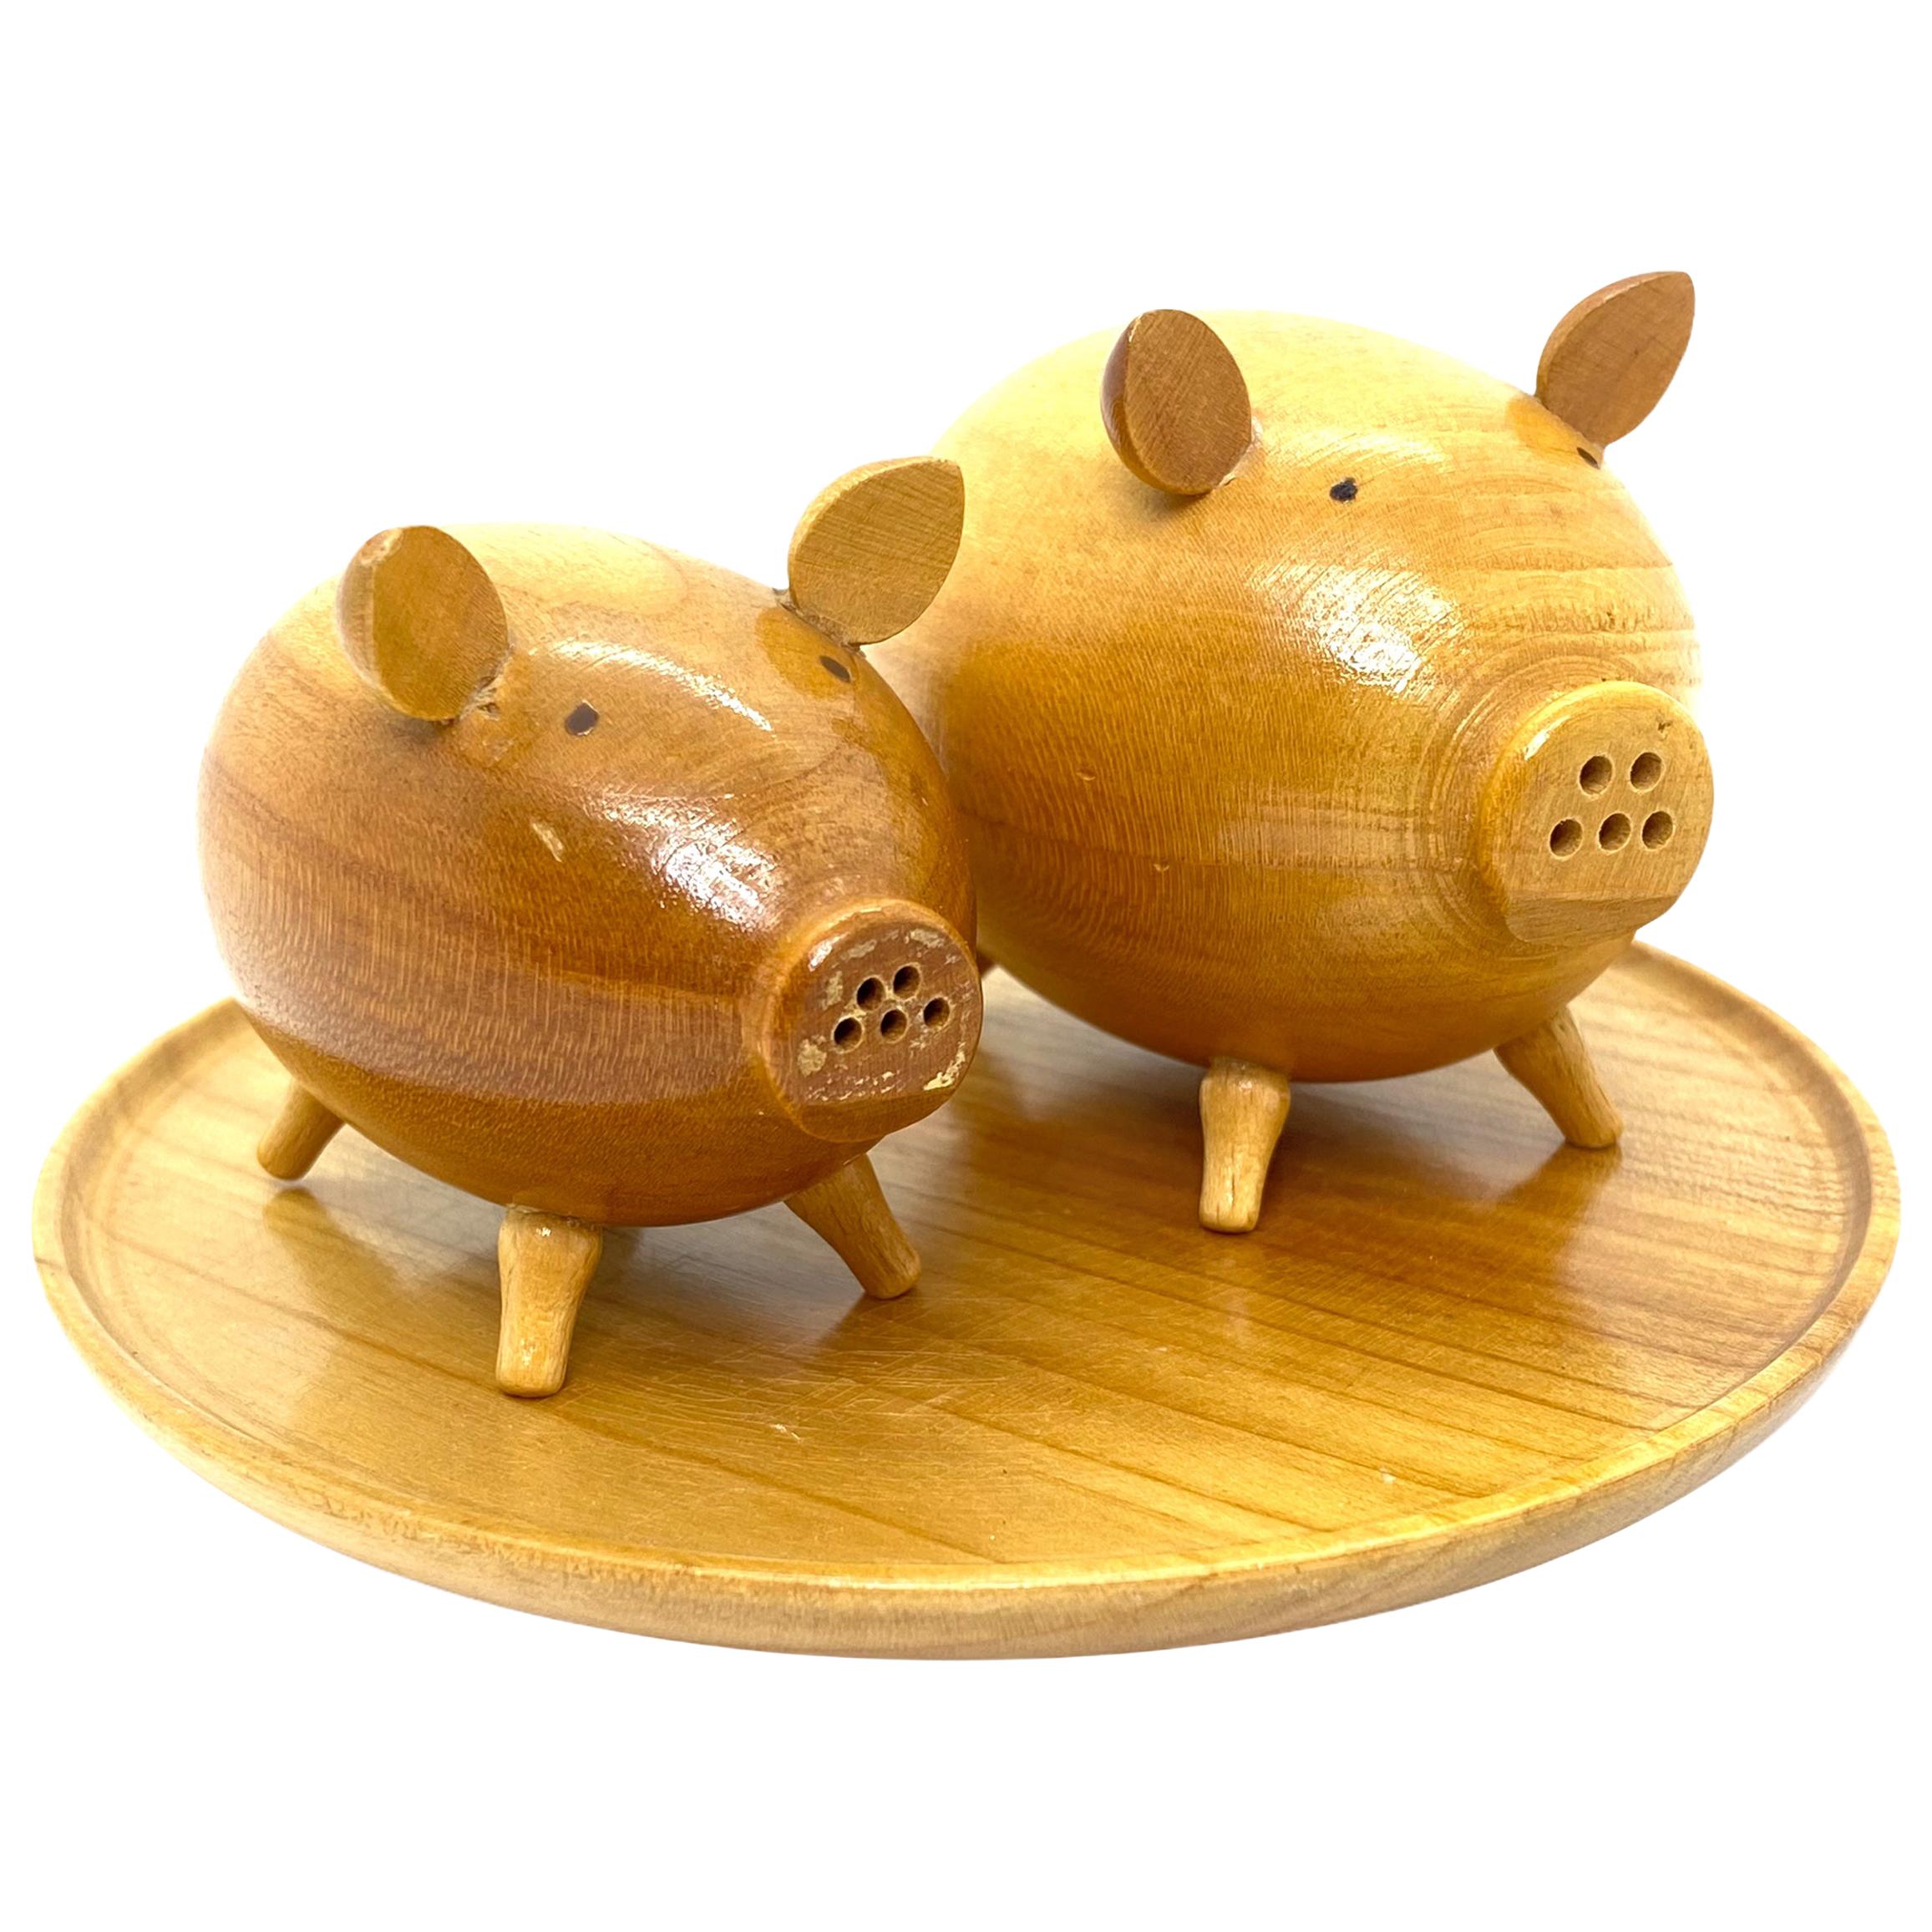 Two Salt and Paper Shaker Pigs on Tray, Wood Danish Design, 1960s For Sale